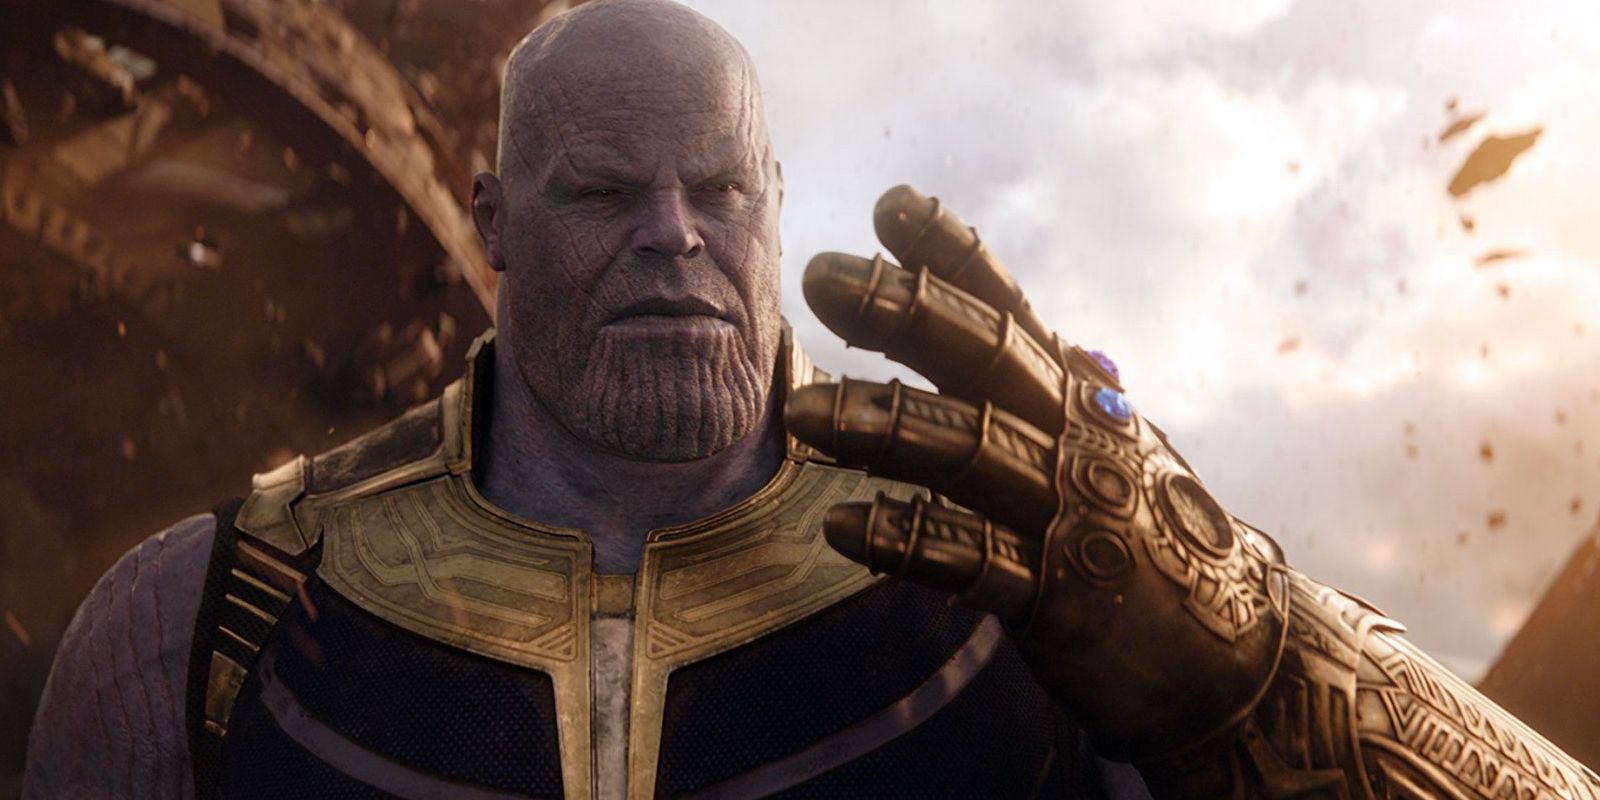 Thanos wearing the Infinity Gauntlet in Avengers Infinity War